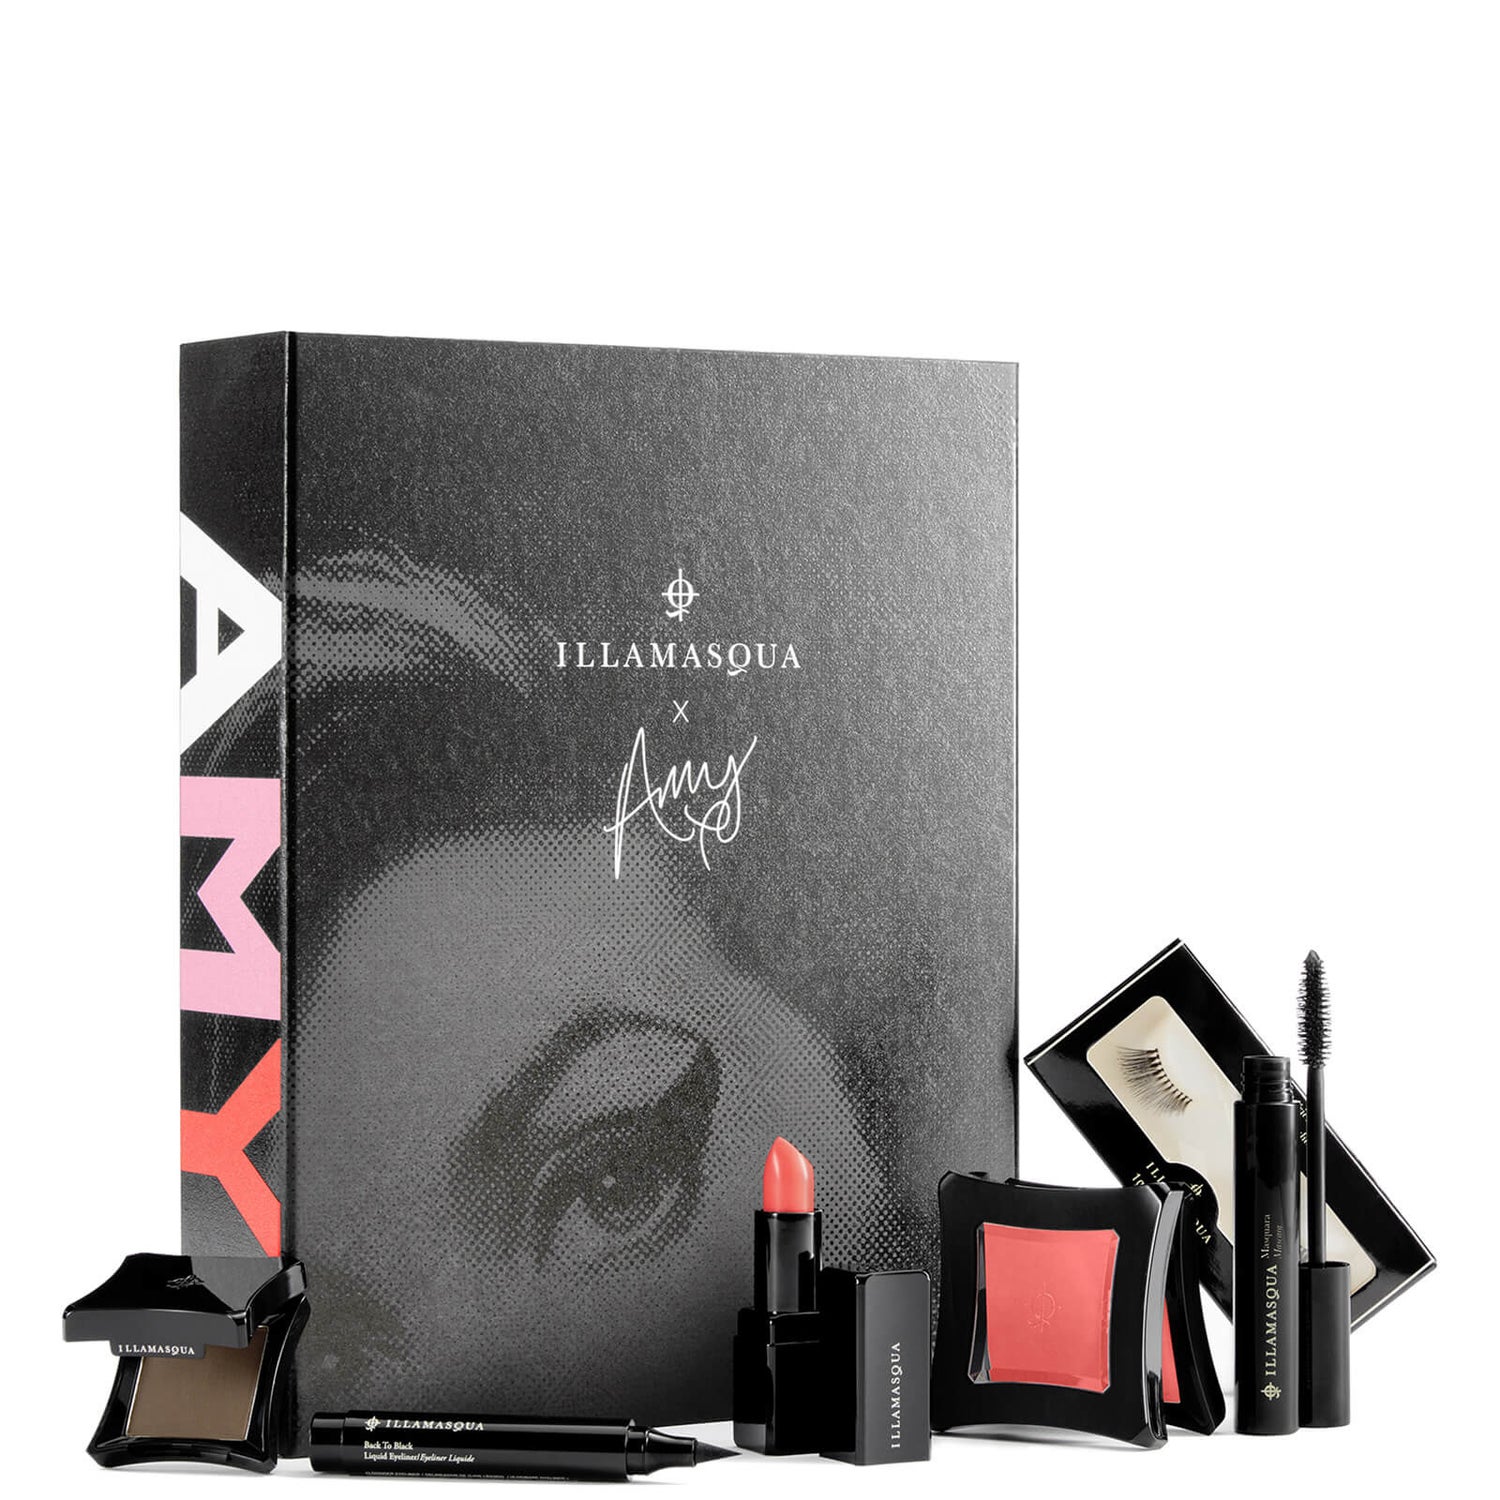 Frankly Amy Limited Edition Beauty Box (Worth $146.00)